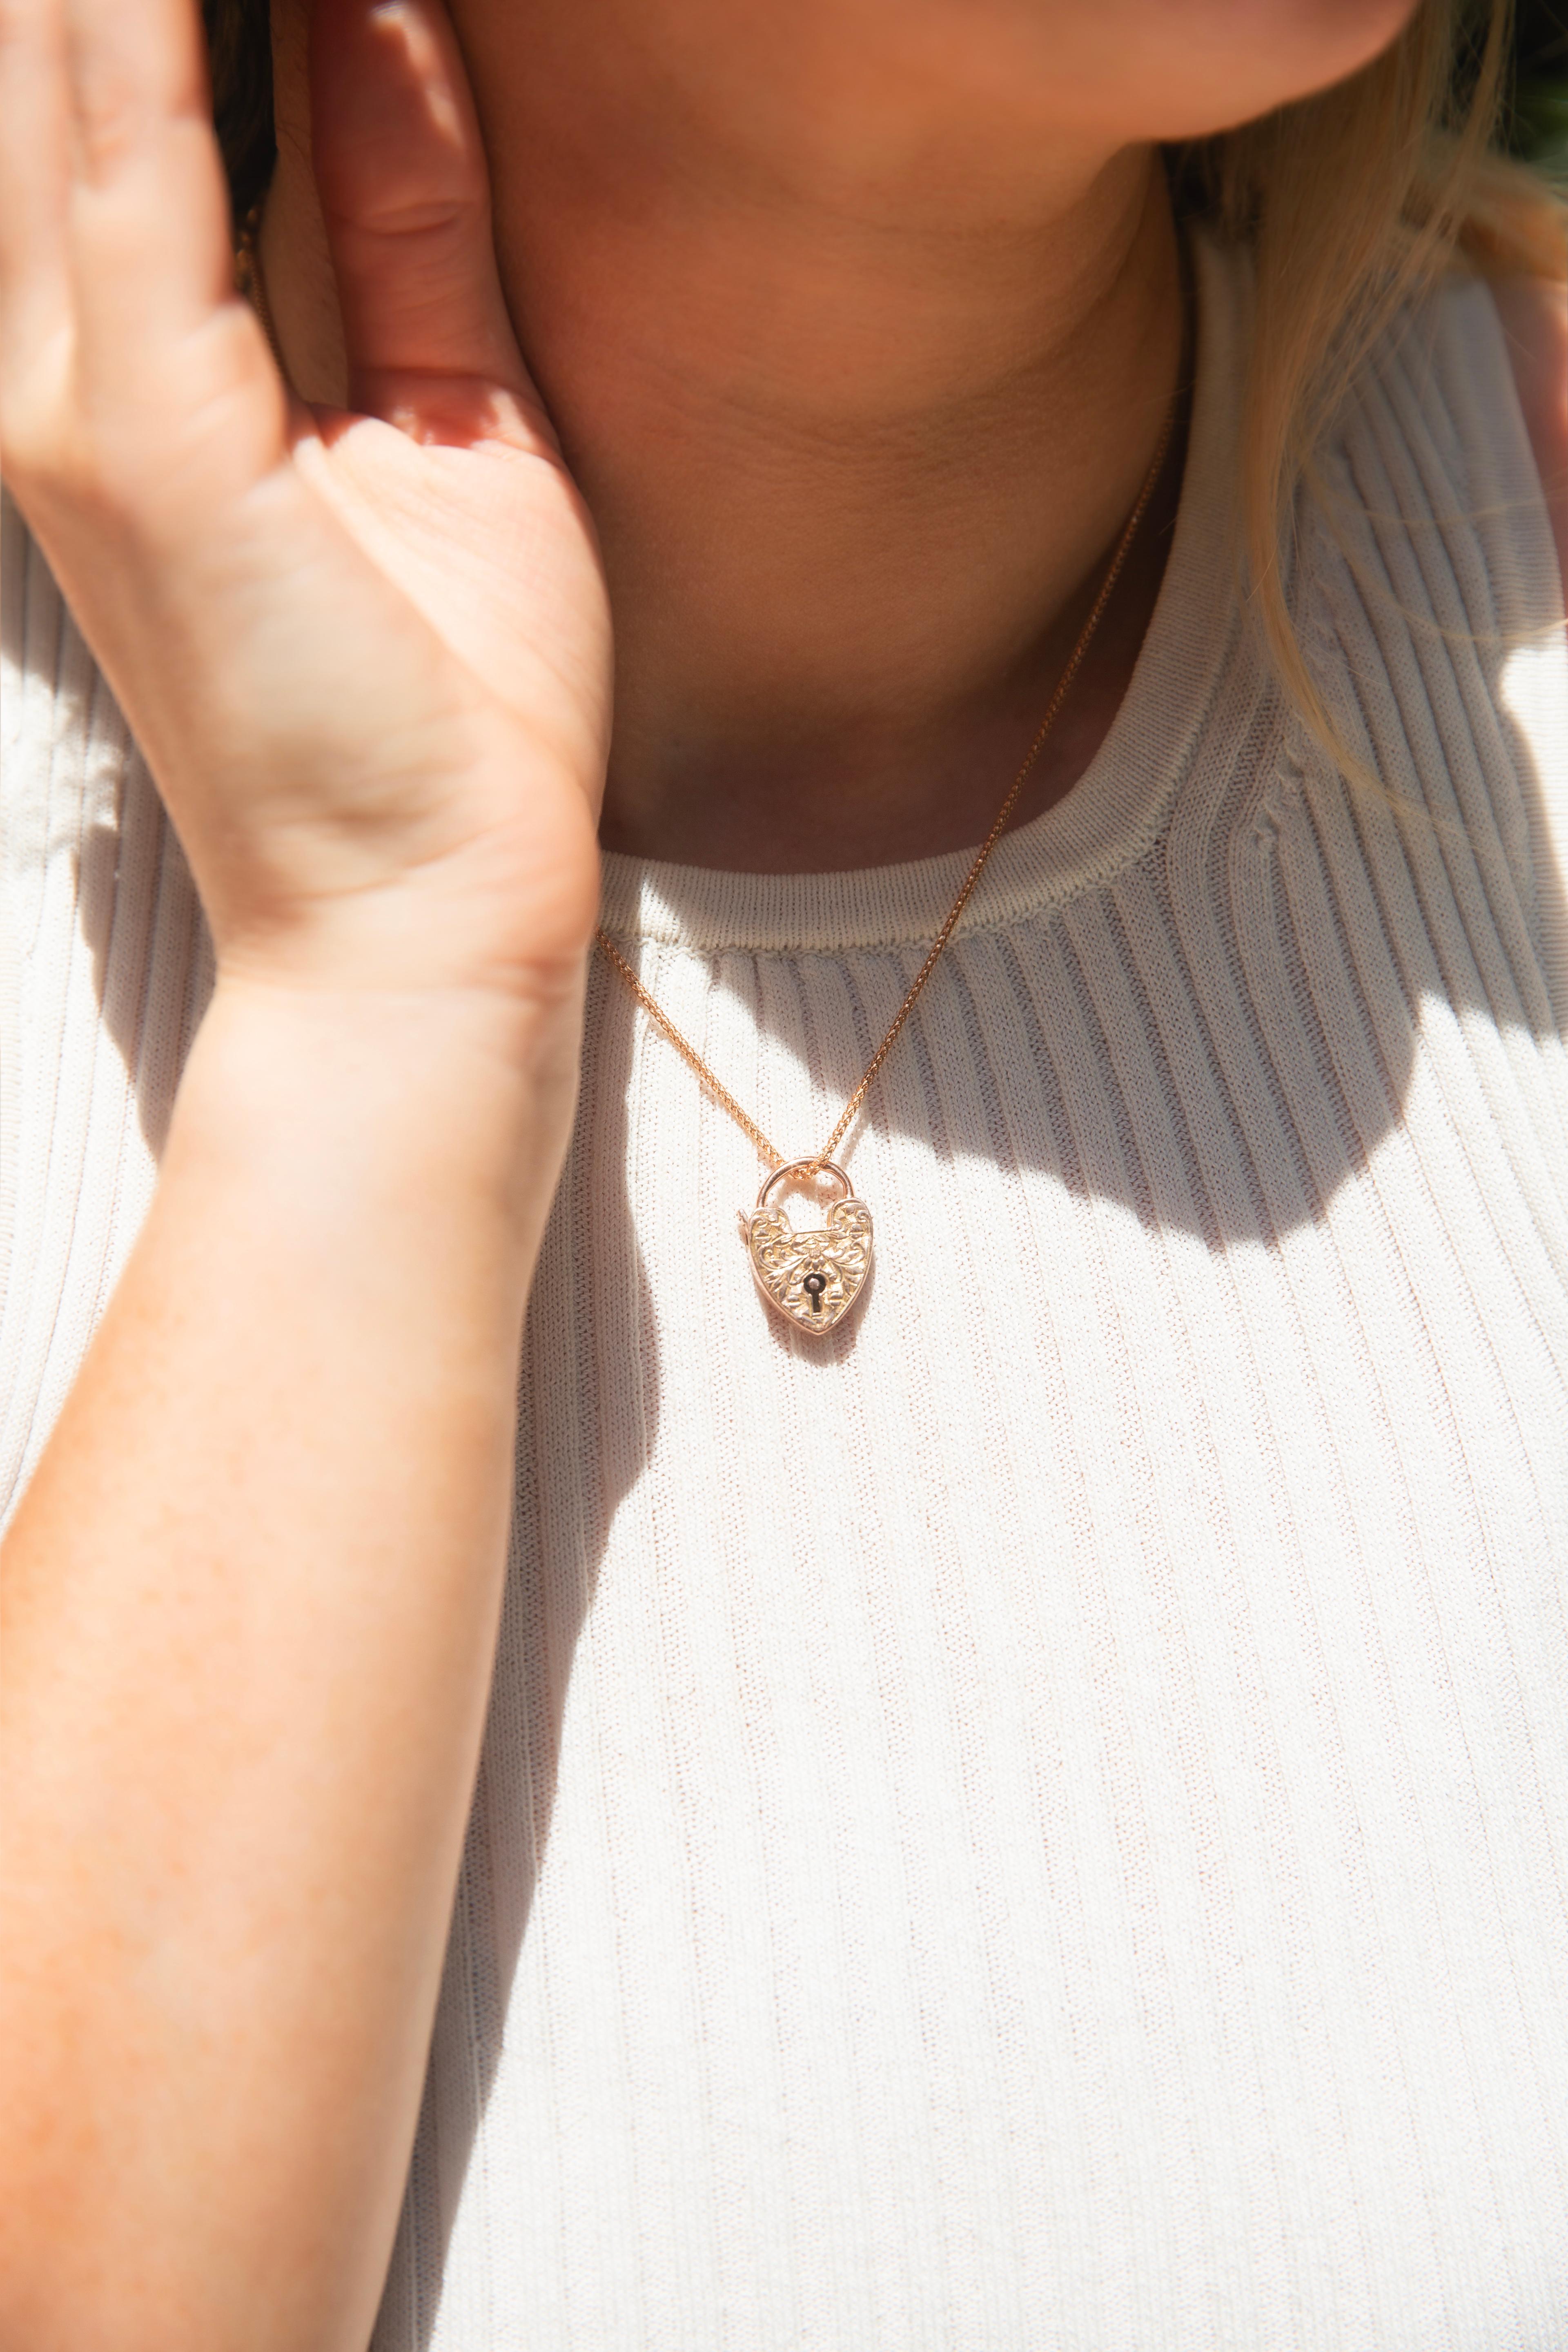 Symbolising love and commitment between two hearts and the desire to keep that love safe, the locket is the perfect gift for you and yours. Crafted in 9 carat rose gold and threaded with a lovely 18 carat chain, The Leonie Pendant & Chain would be a